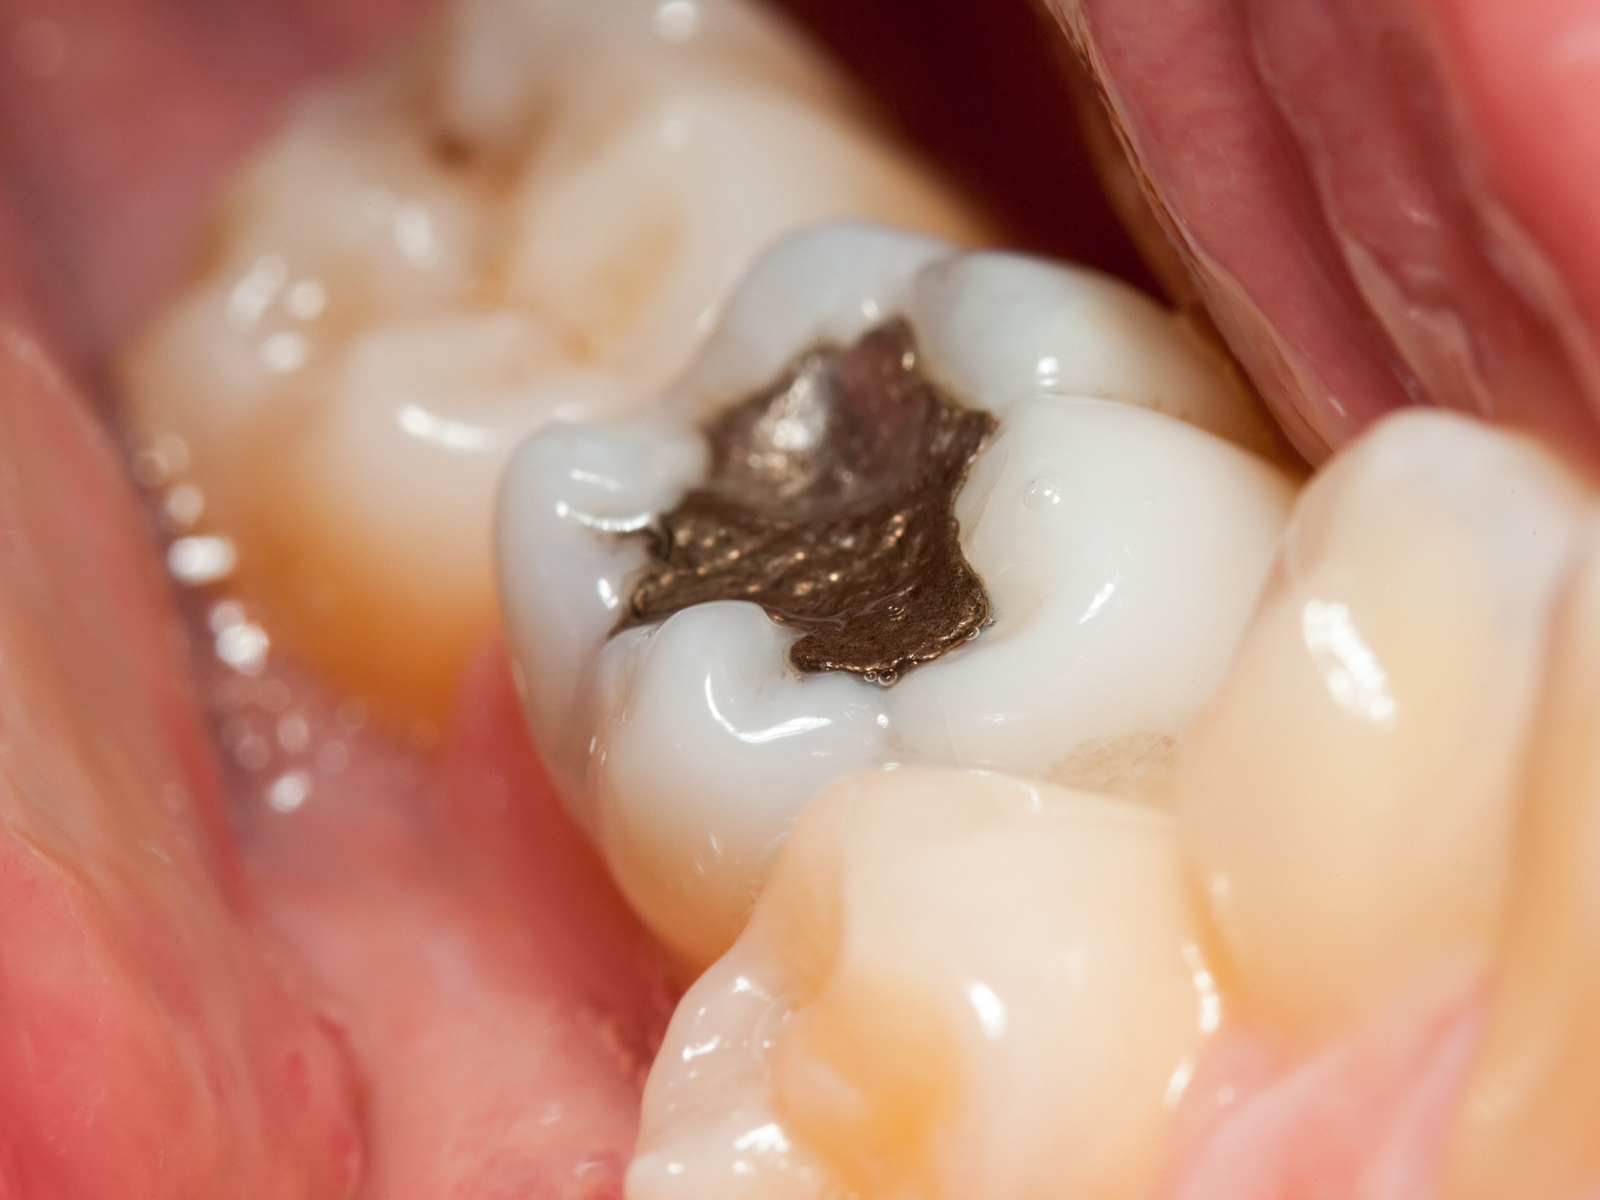 Tips For Taking Care of A Dental Filling